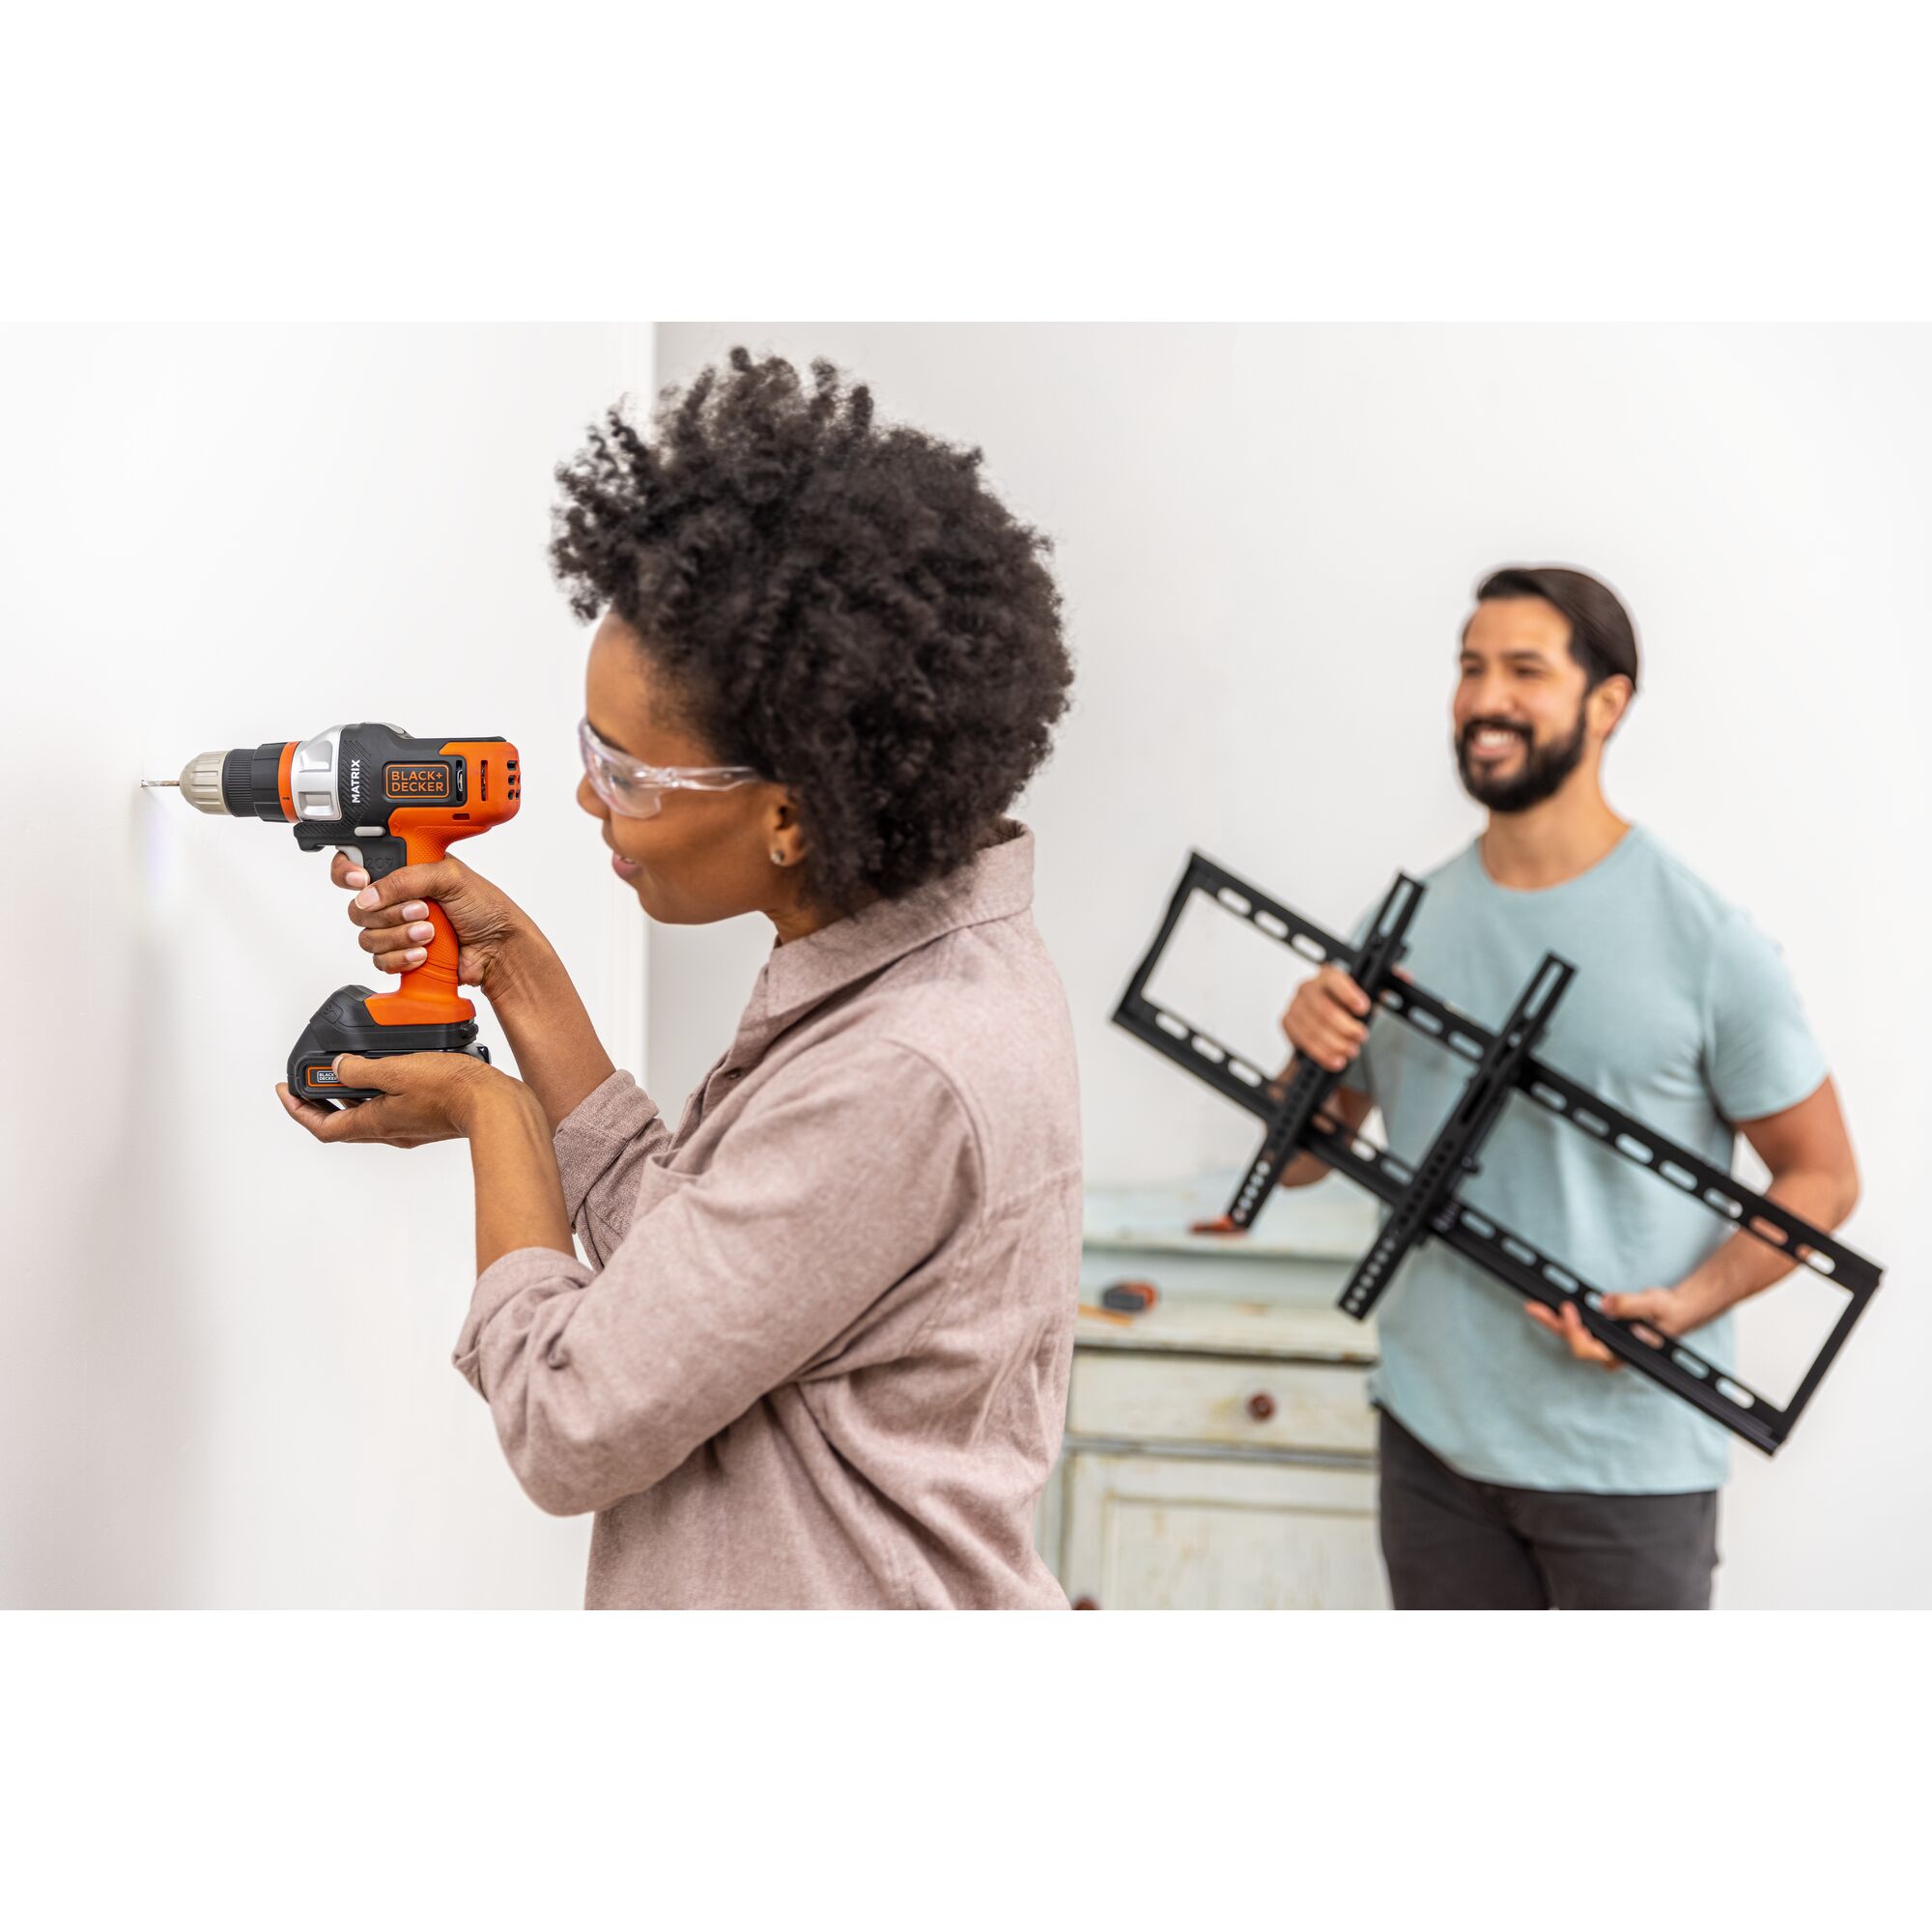 Person drills hole in to drywall to prepare to hang a TV mount using the BLACK+DECKER MATRIX drill attachment